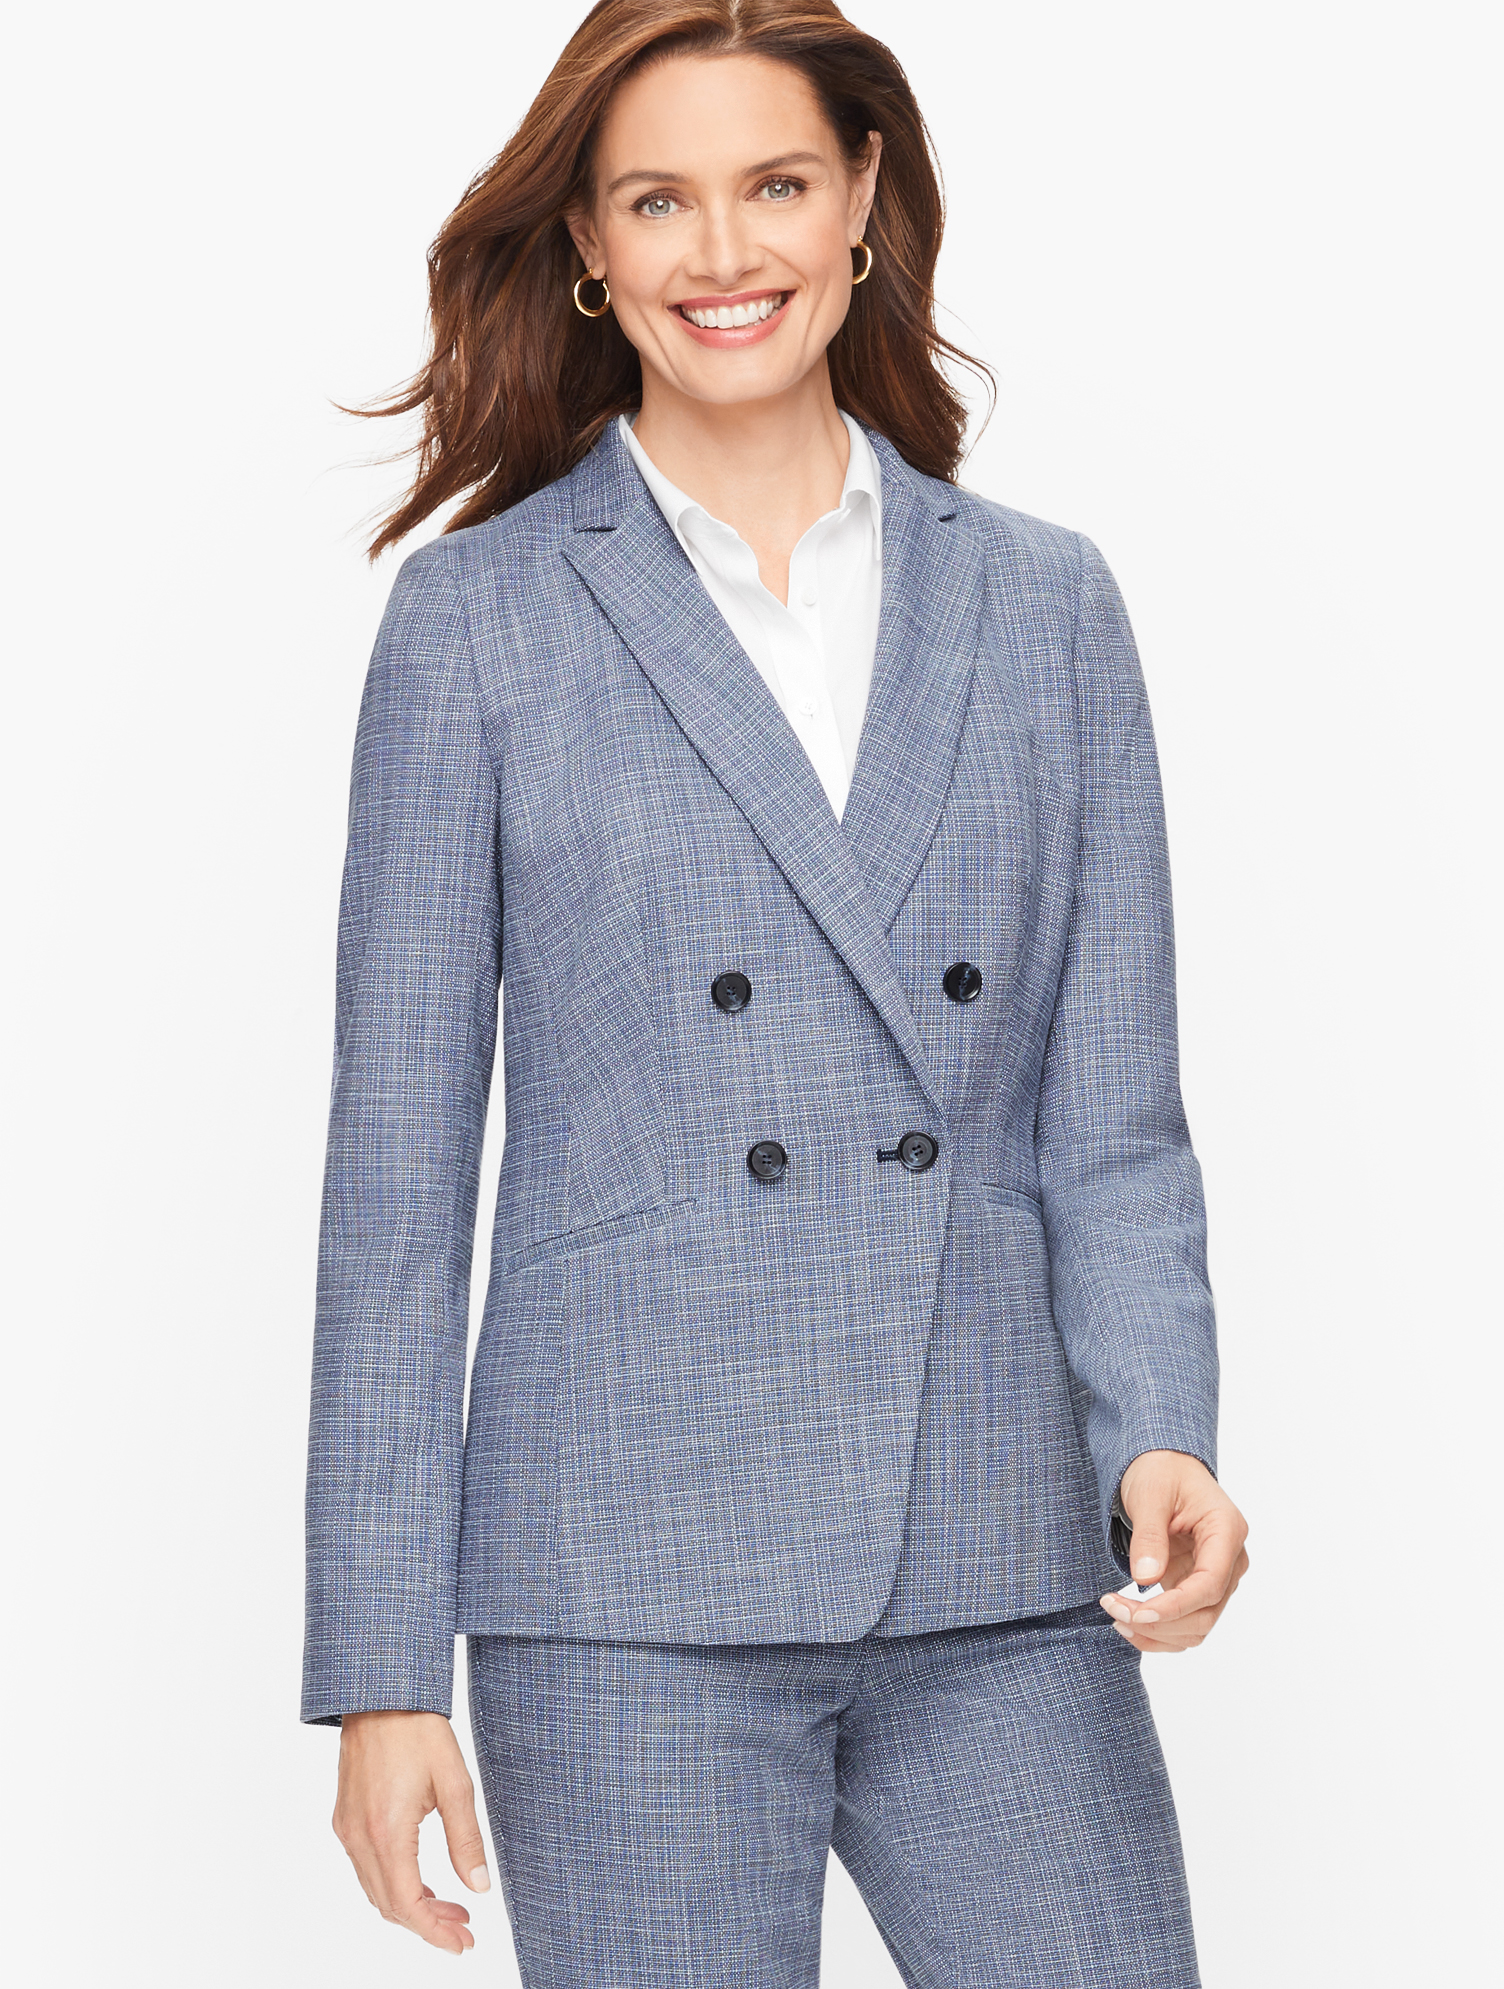 Talbots Petite - Blended Tweed Double Breasted Blazer - Blue - 8